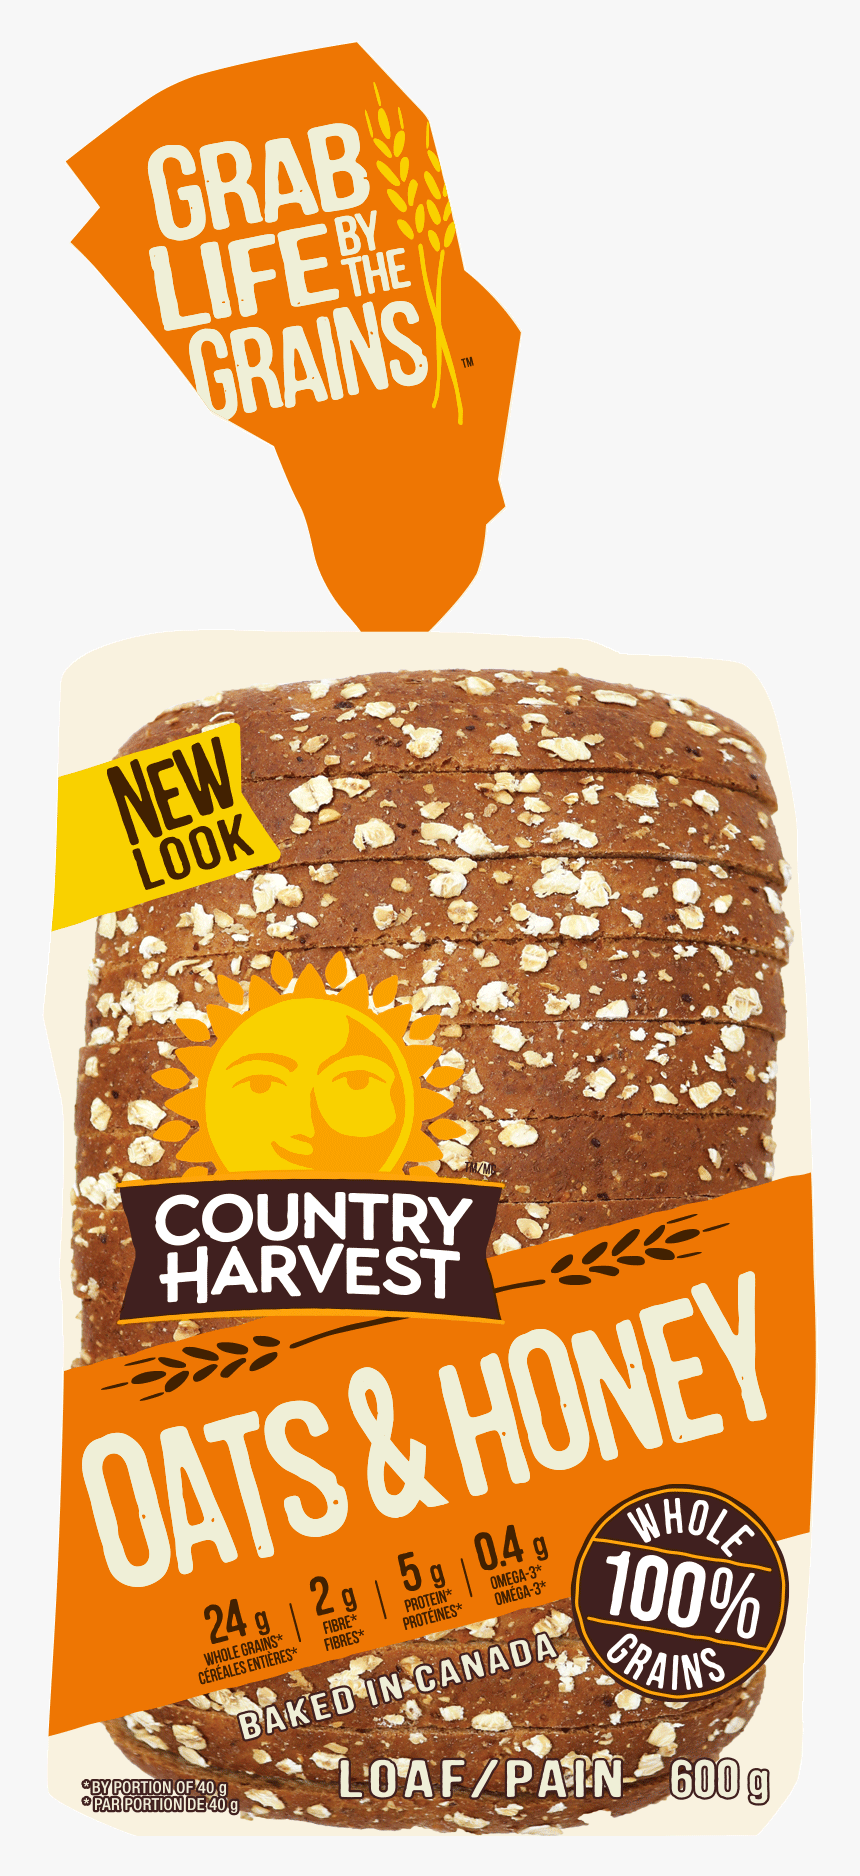 Country Harvest Oat Honey Bread Image - Country Harvest 14 Grain Bread, HD Png Download, Free Download